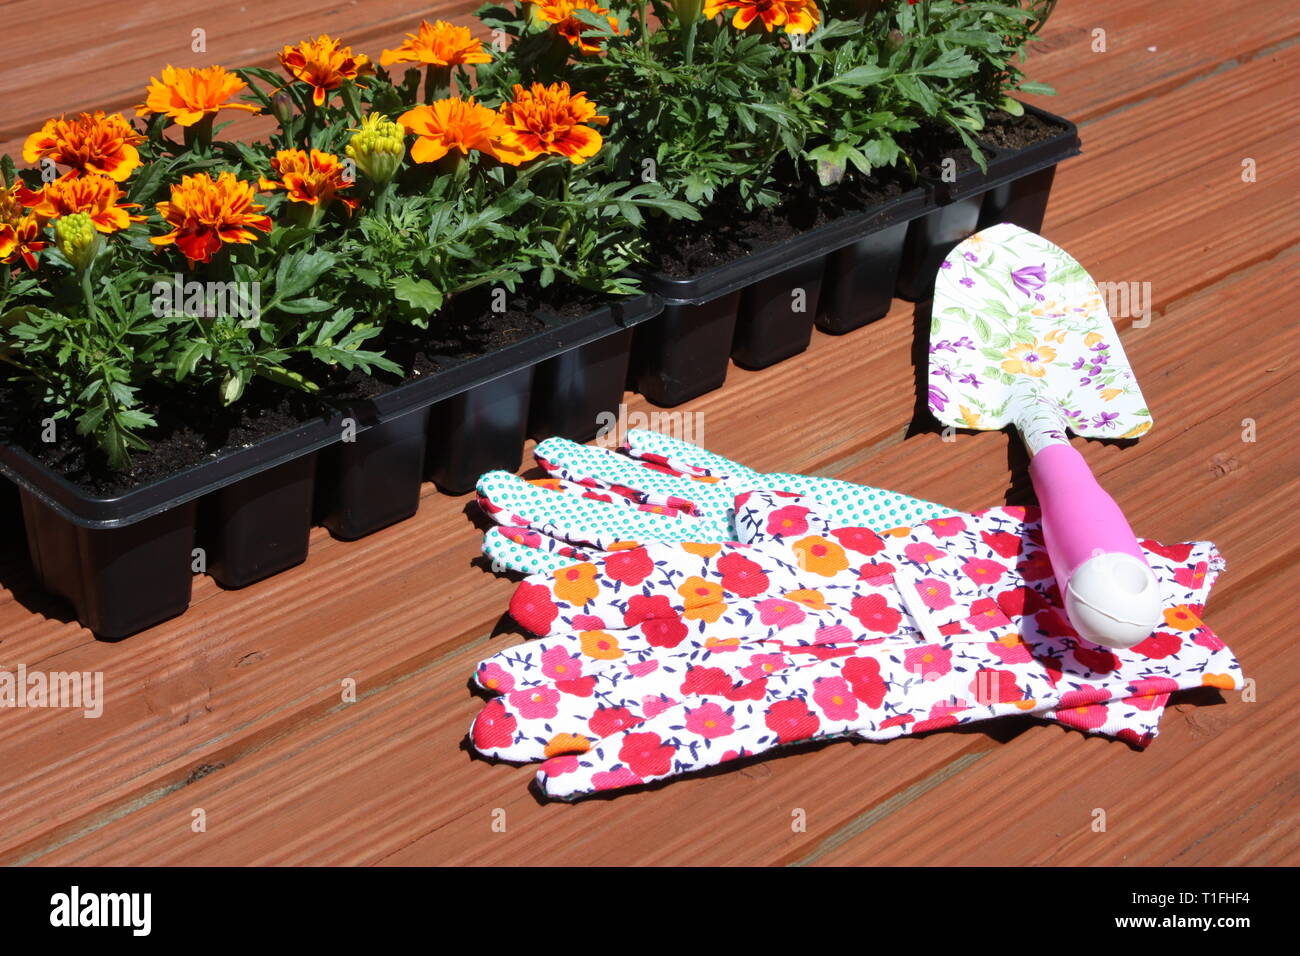 Marigold flowers with hand gloves Stock Photo